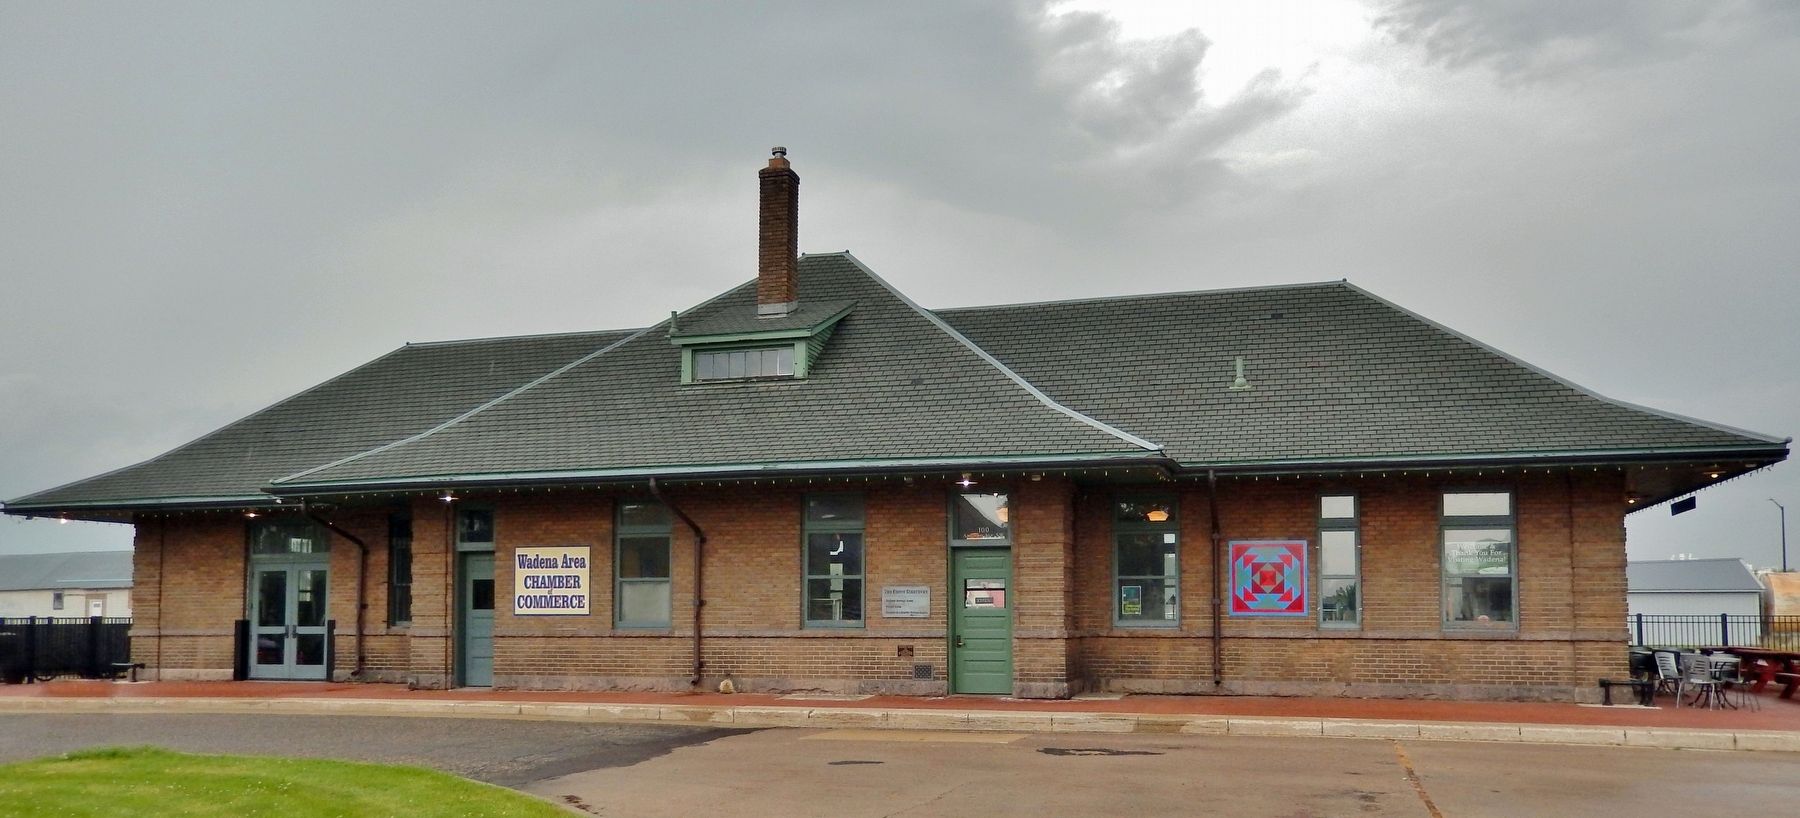 Northern Pacific Passenger Depot (<i>south/front elevation</i>) image. Click for full size.